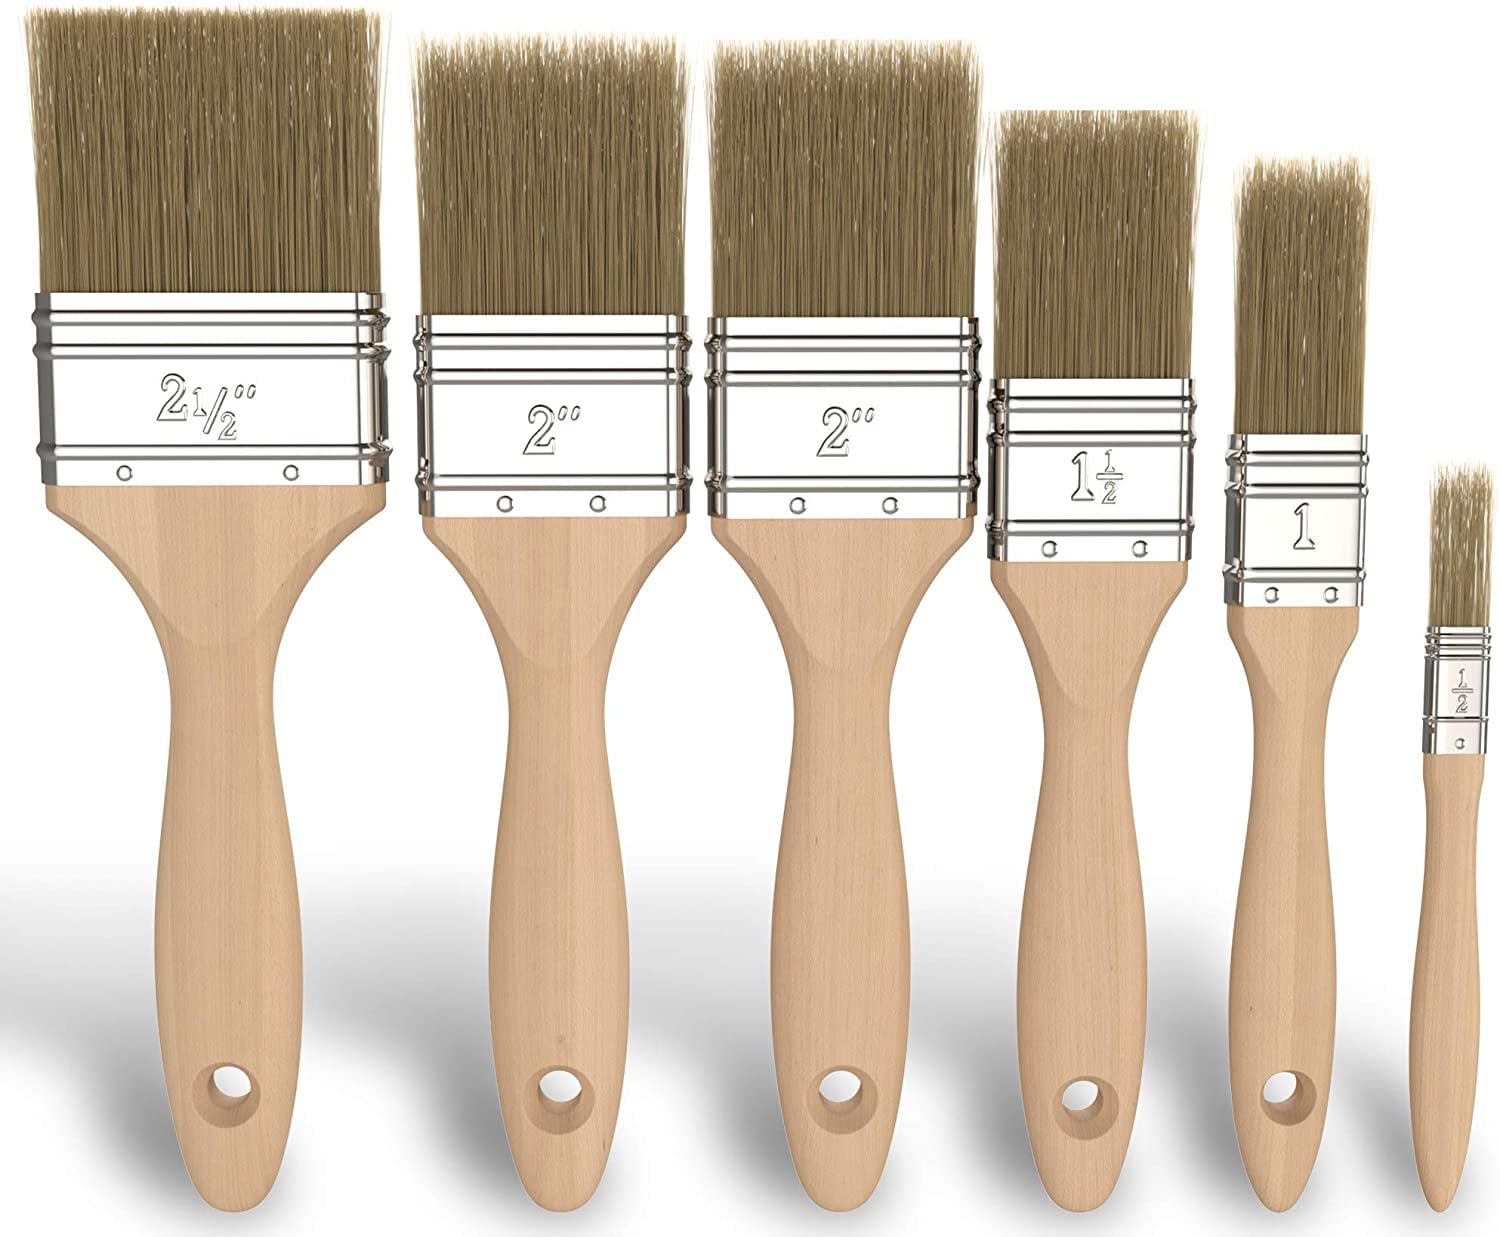 5. Understanding Brush Sizes and Numbering - wide 5